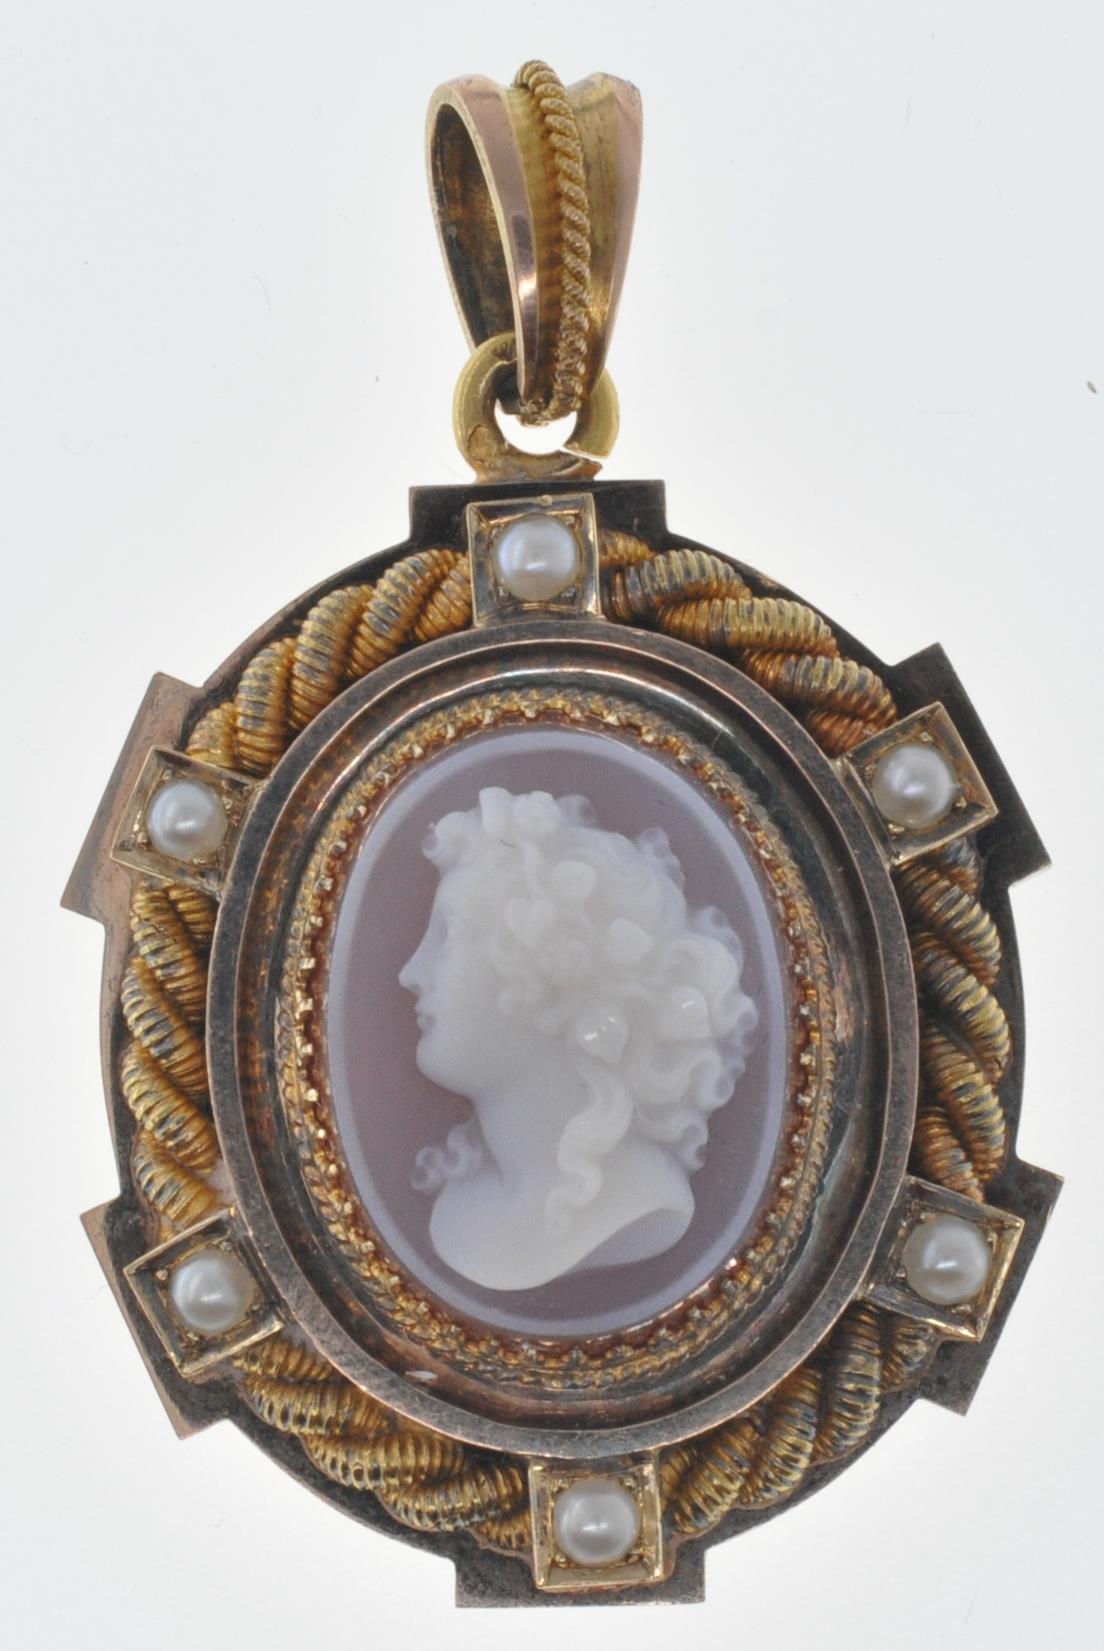 ANTIQUE SEED PEARL AND CAMEO LOCKET PENDANT - Image 2 of 8